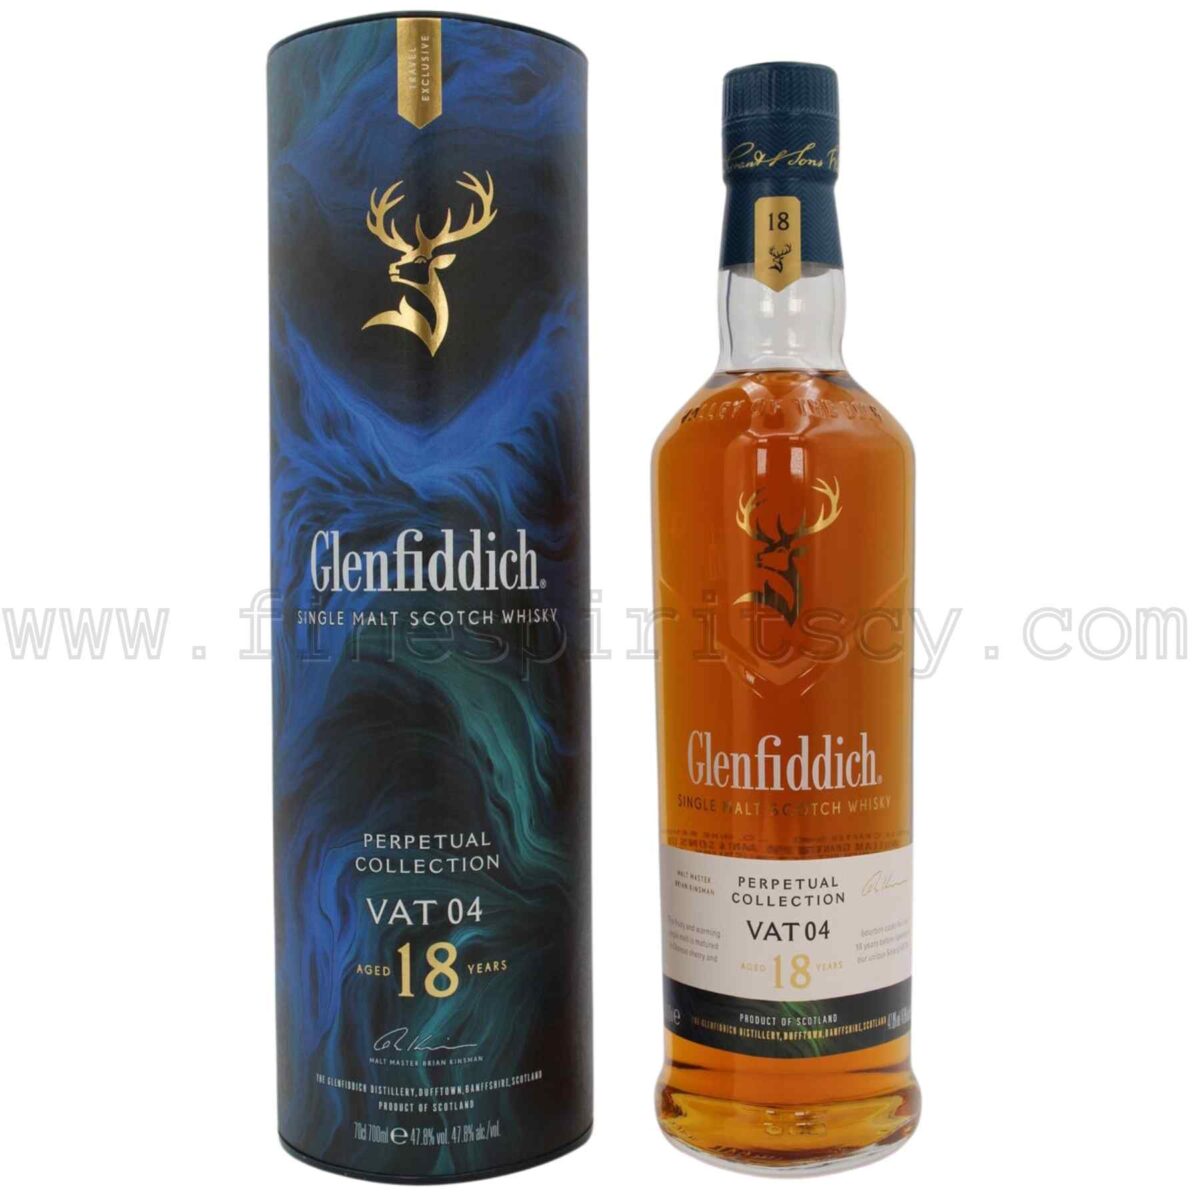 Glenfiddich Perpetual Collection VAT 04